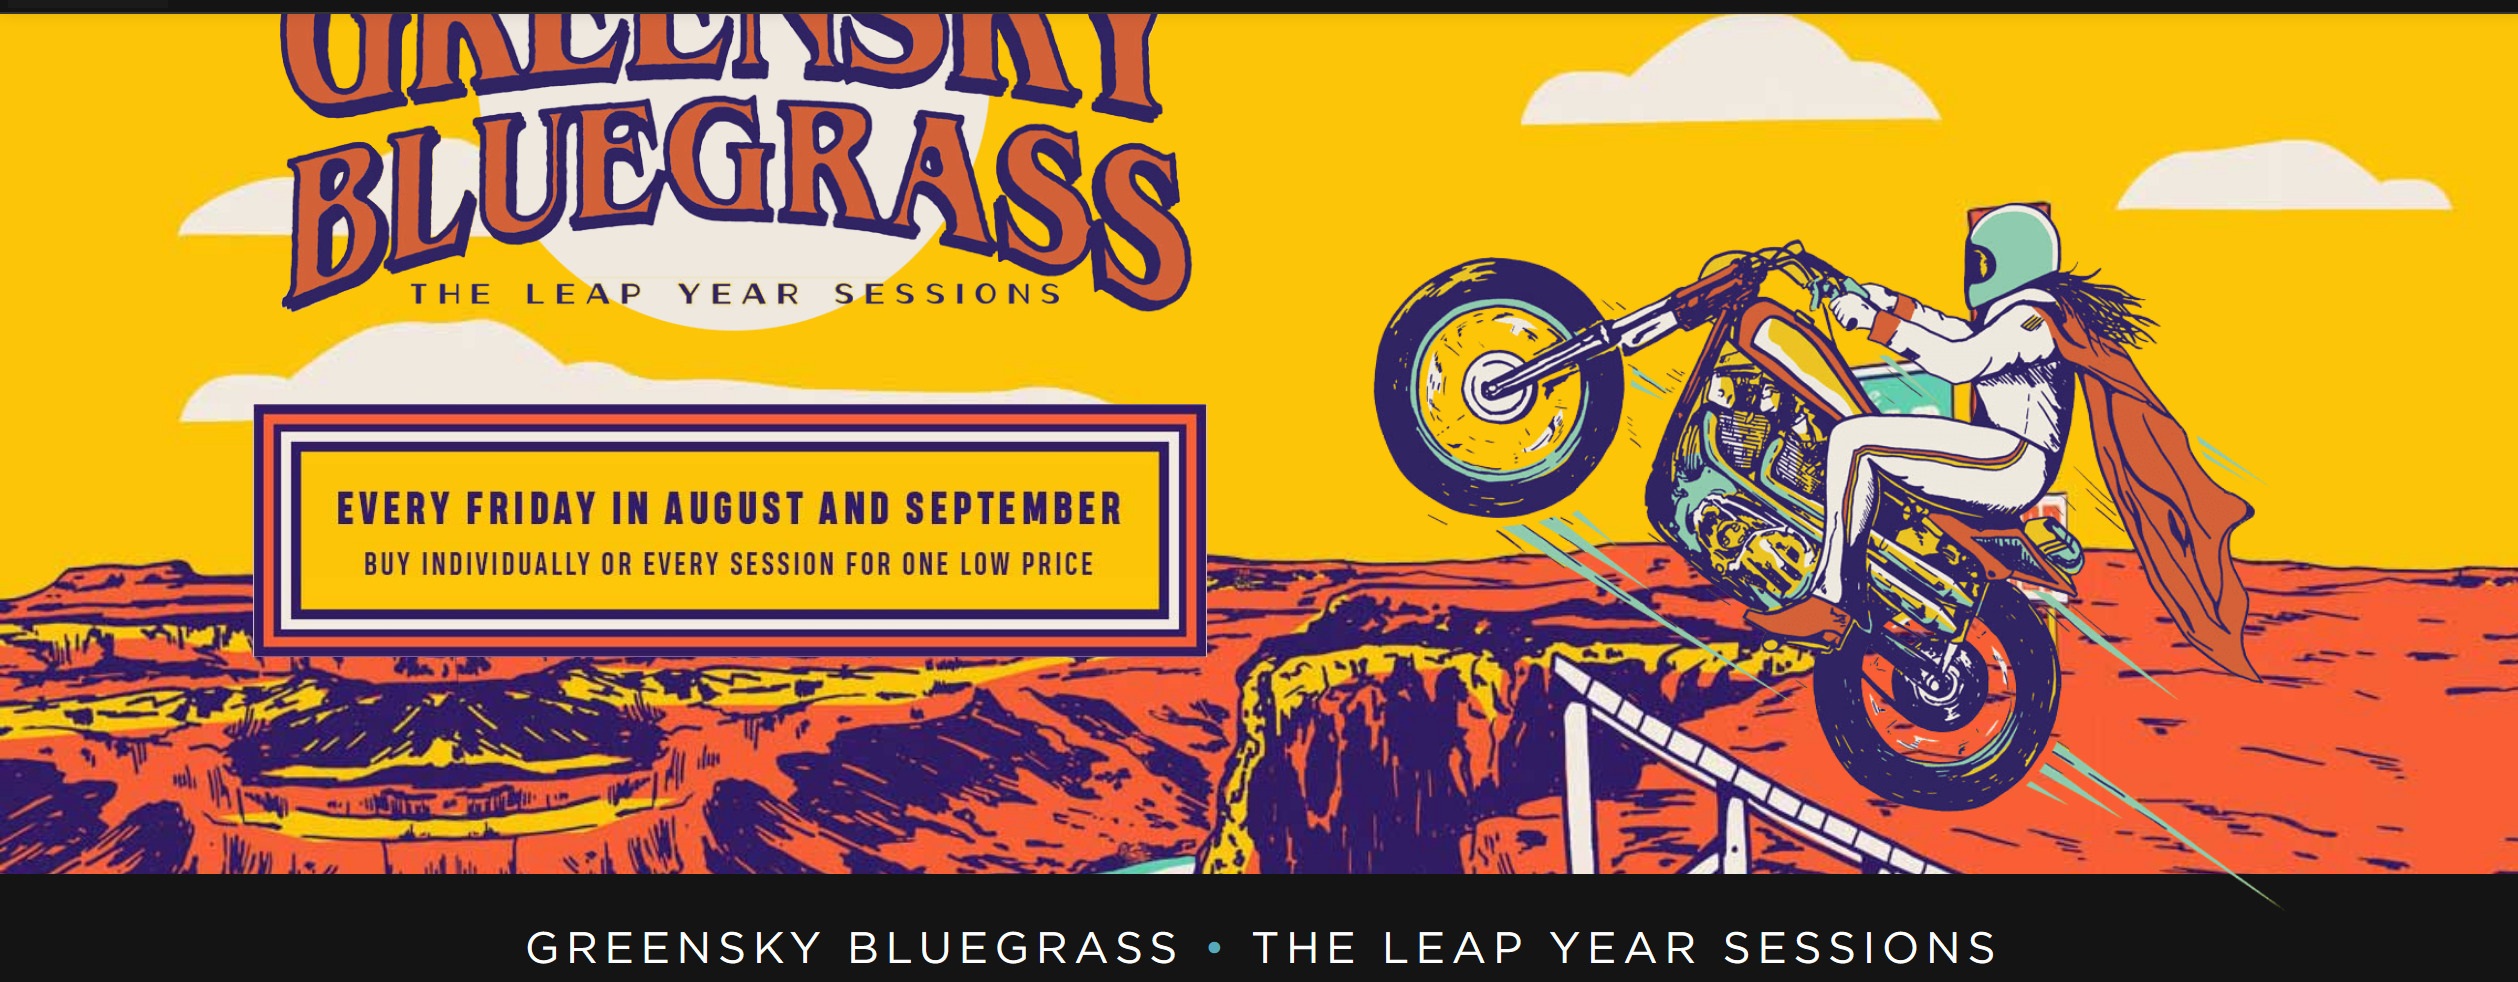 Greensky Bluegrass Reveals “The Leap Year Sessions”